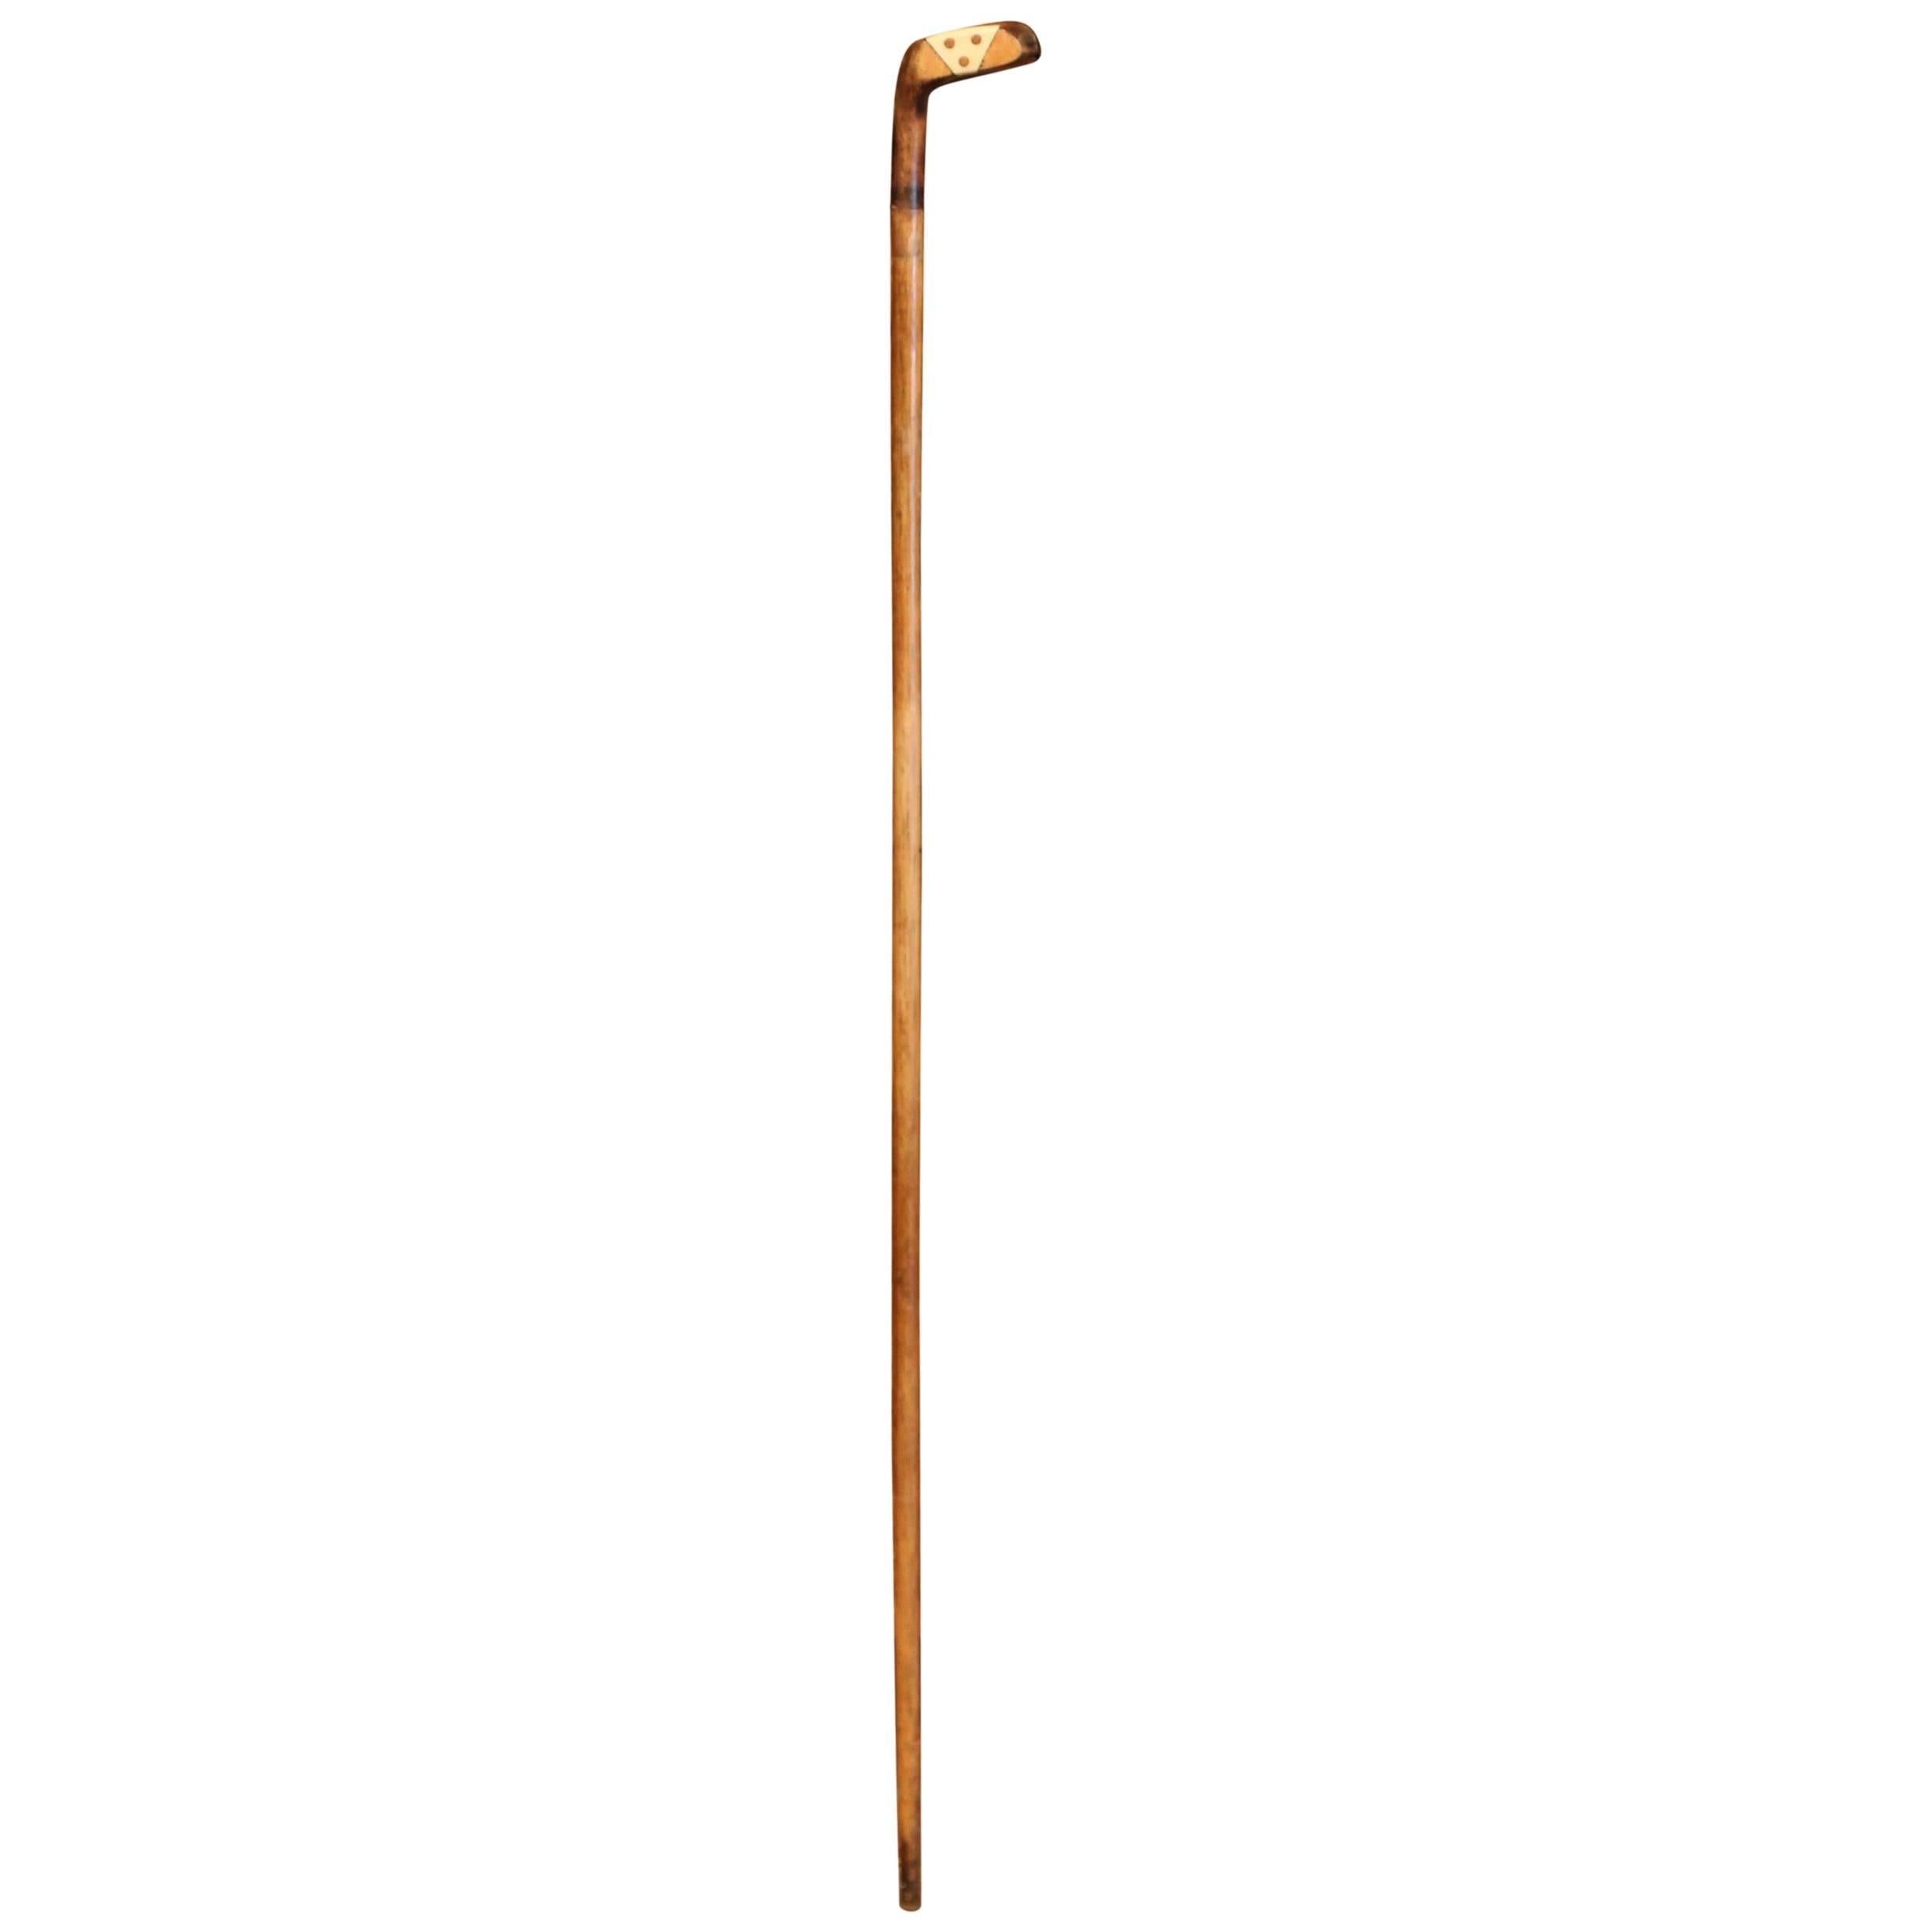 Early 20th Century English Wooden Golf Club Walking Stick or “Sunday Cane”